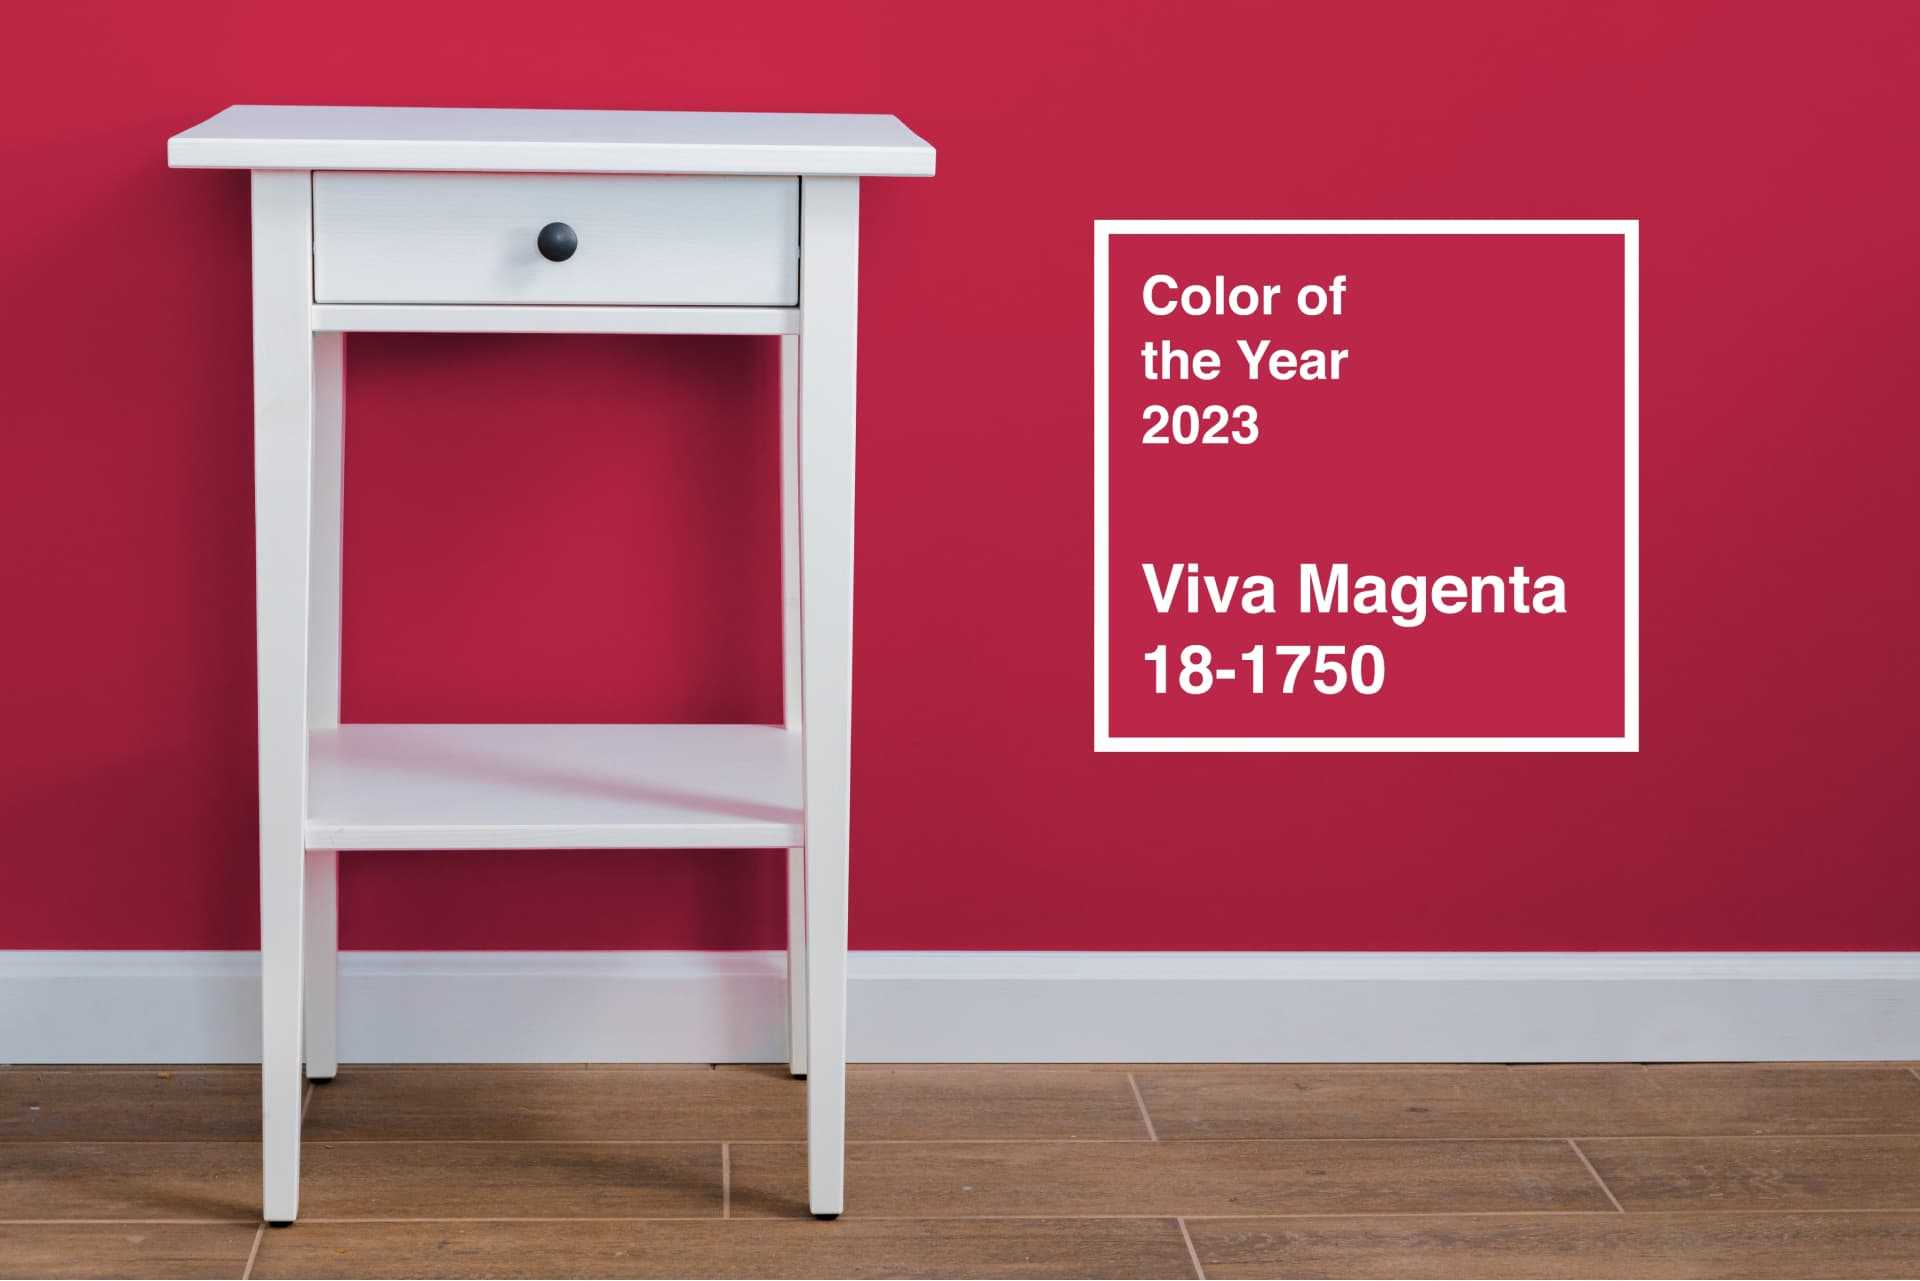 Pantone Color of the Year 2023, Viva Magenta, on an accent wall to contrast with a white table